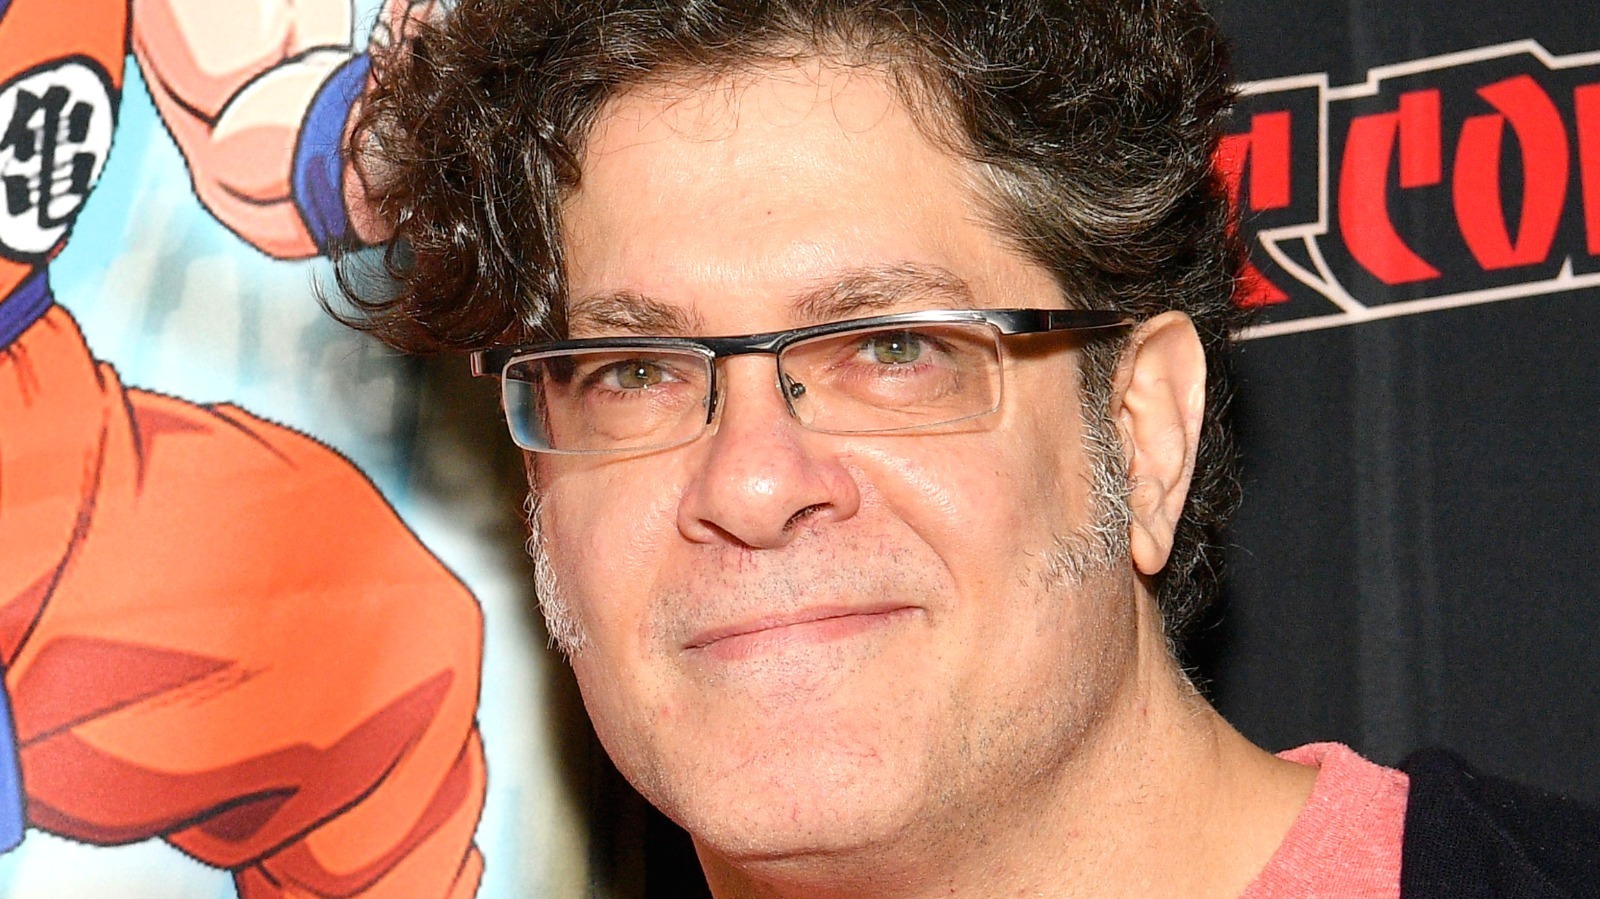 NEWS: Sean Schemmel, who is the - Anime News Centre